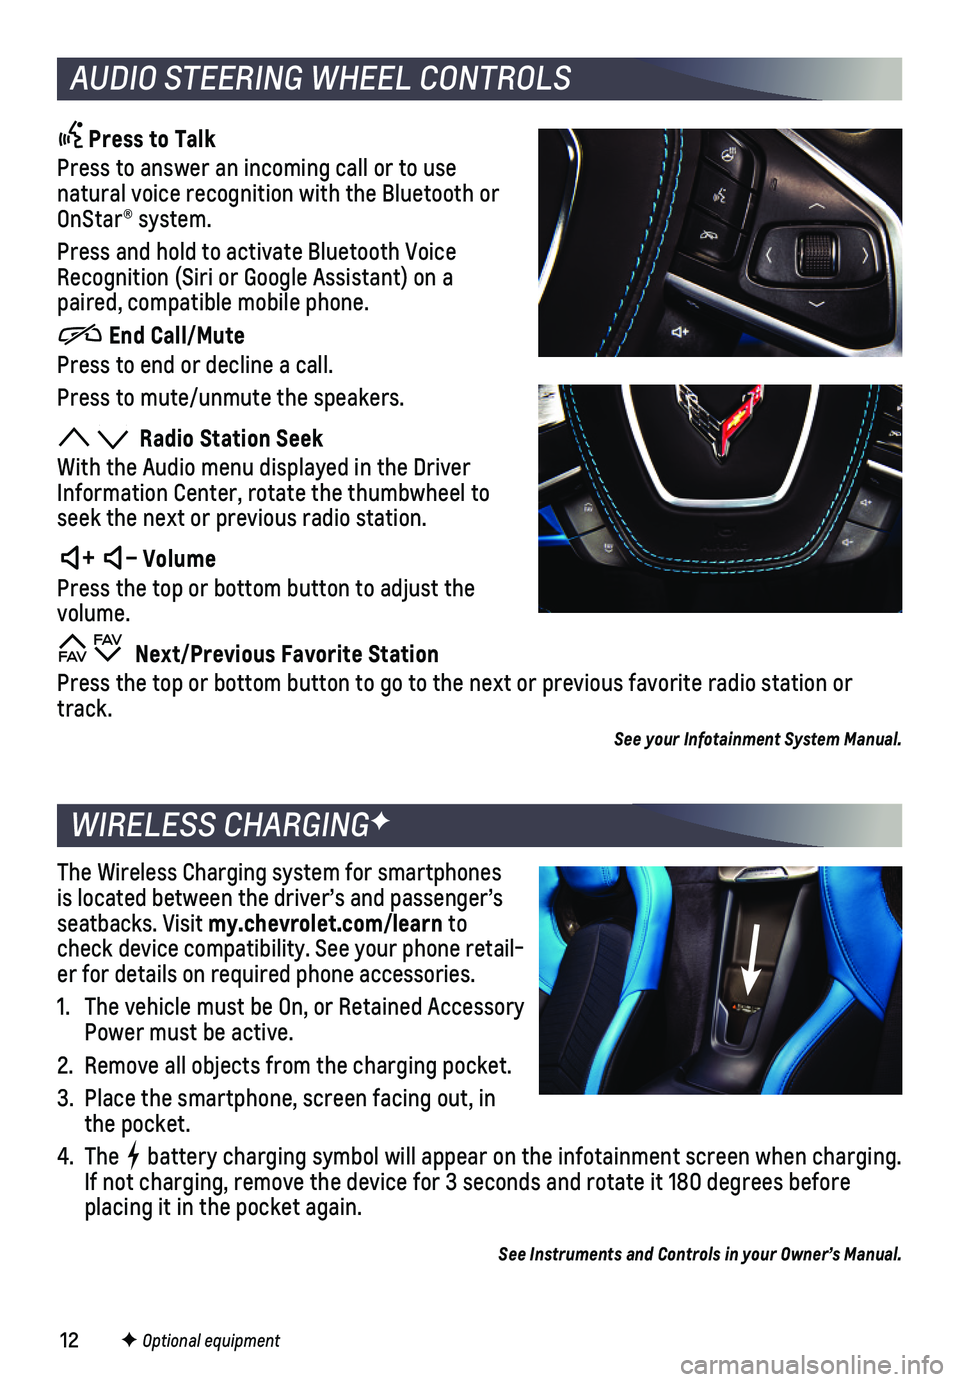 CHEVROLET CORVETTE 2020  Get To Know Guide 12
 Press to Talk
Press to answer an incoming call or to use natural voice recognition with the Bluetooth or OnStar® system.
Press and hold to activate Bluetooth Voice Recognition (Siri or Google Ass